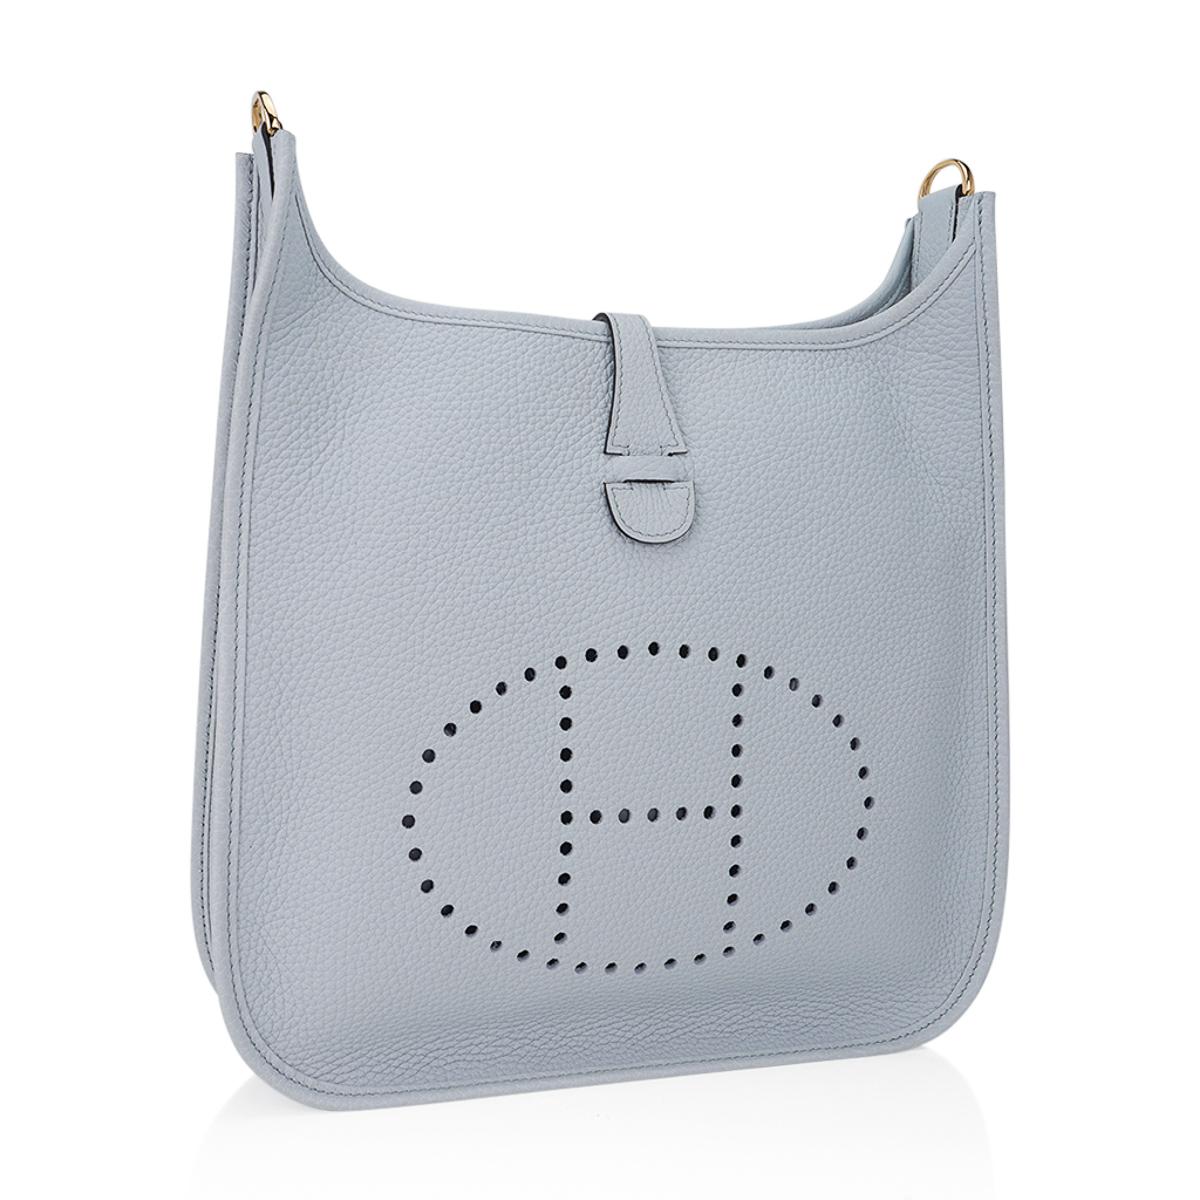 Mightychic offers an Hermes Evelyne PM featured in gorgeous Blue Pale.
Accentuated with Gold hardware.
Plush clemence leather.
Fabulous shoulder or cross body bag with roomy interior and rear outside deep pocket.
Sport strap in textile with leather